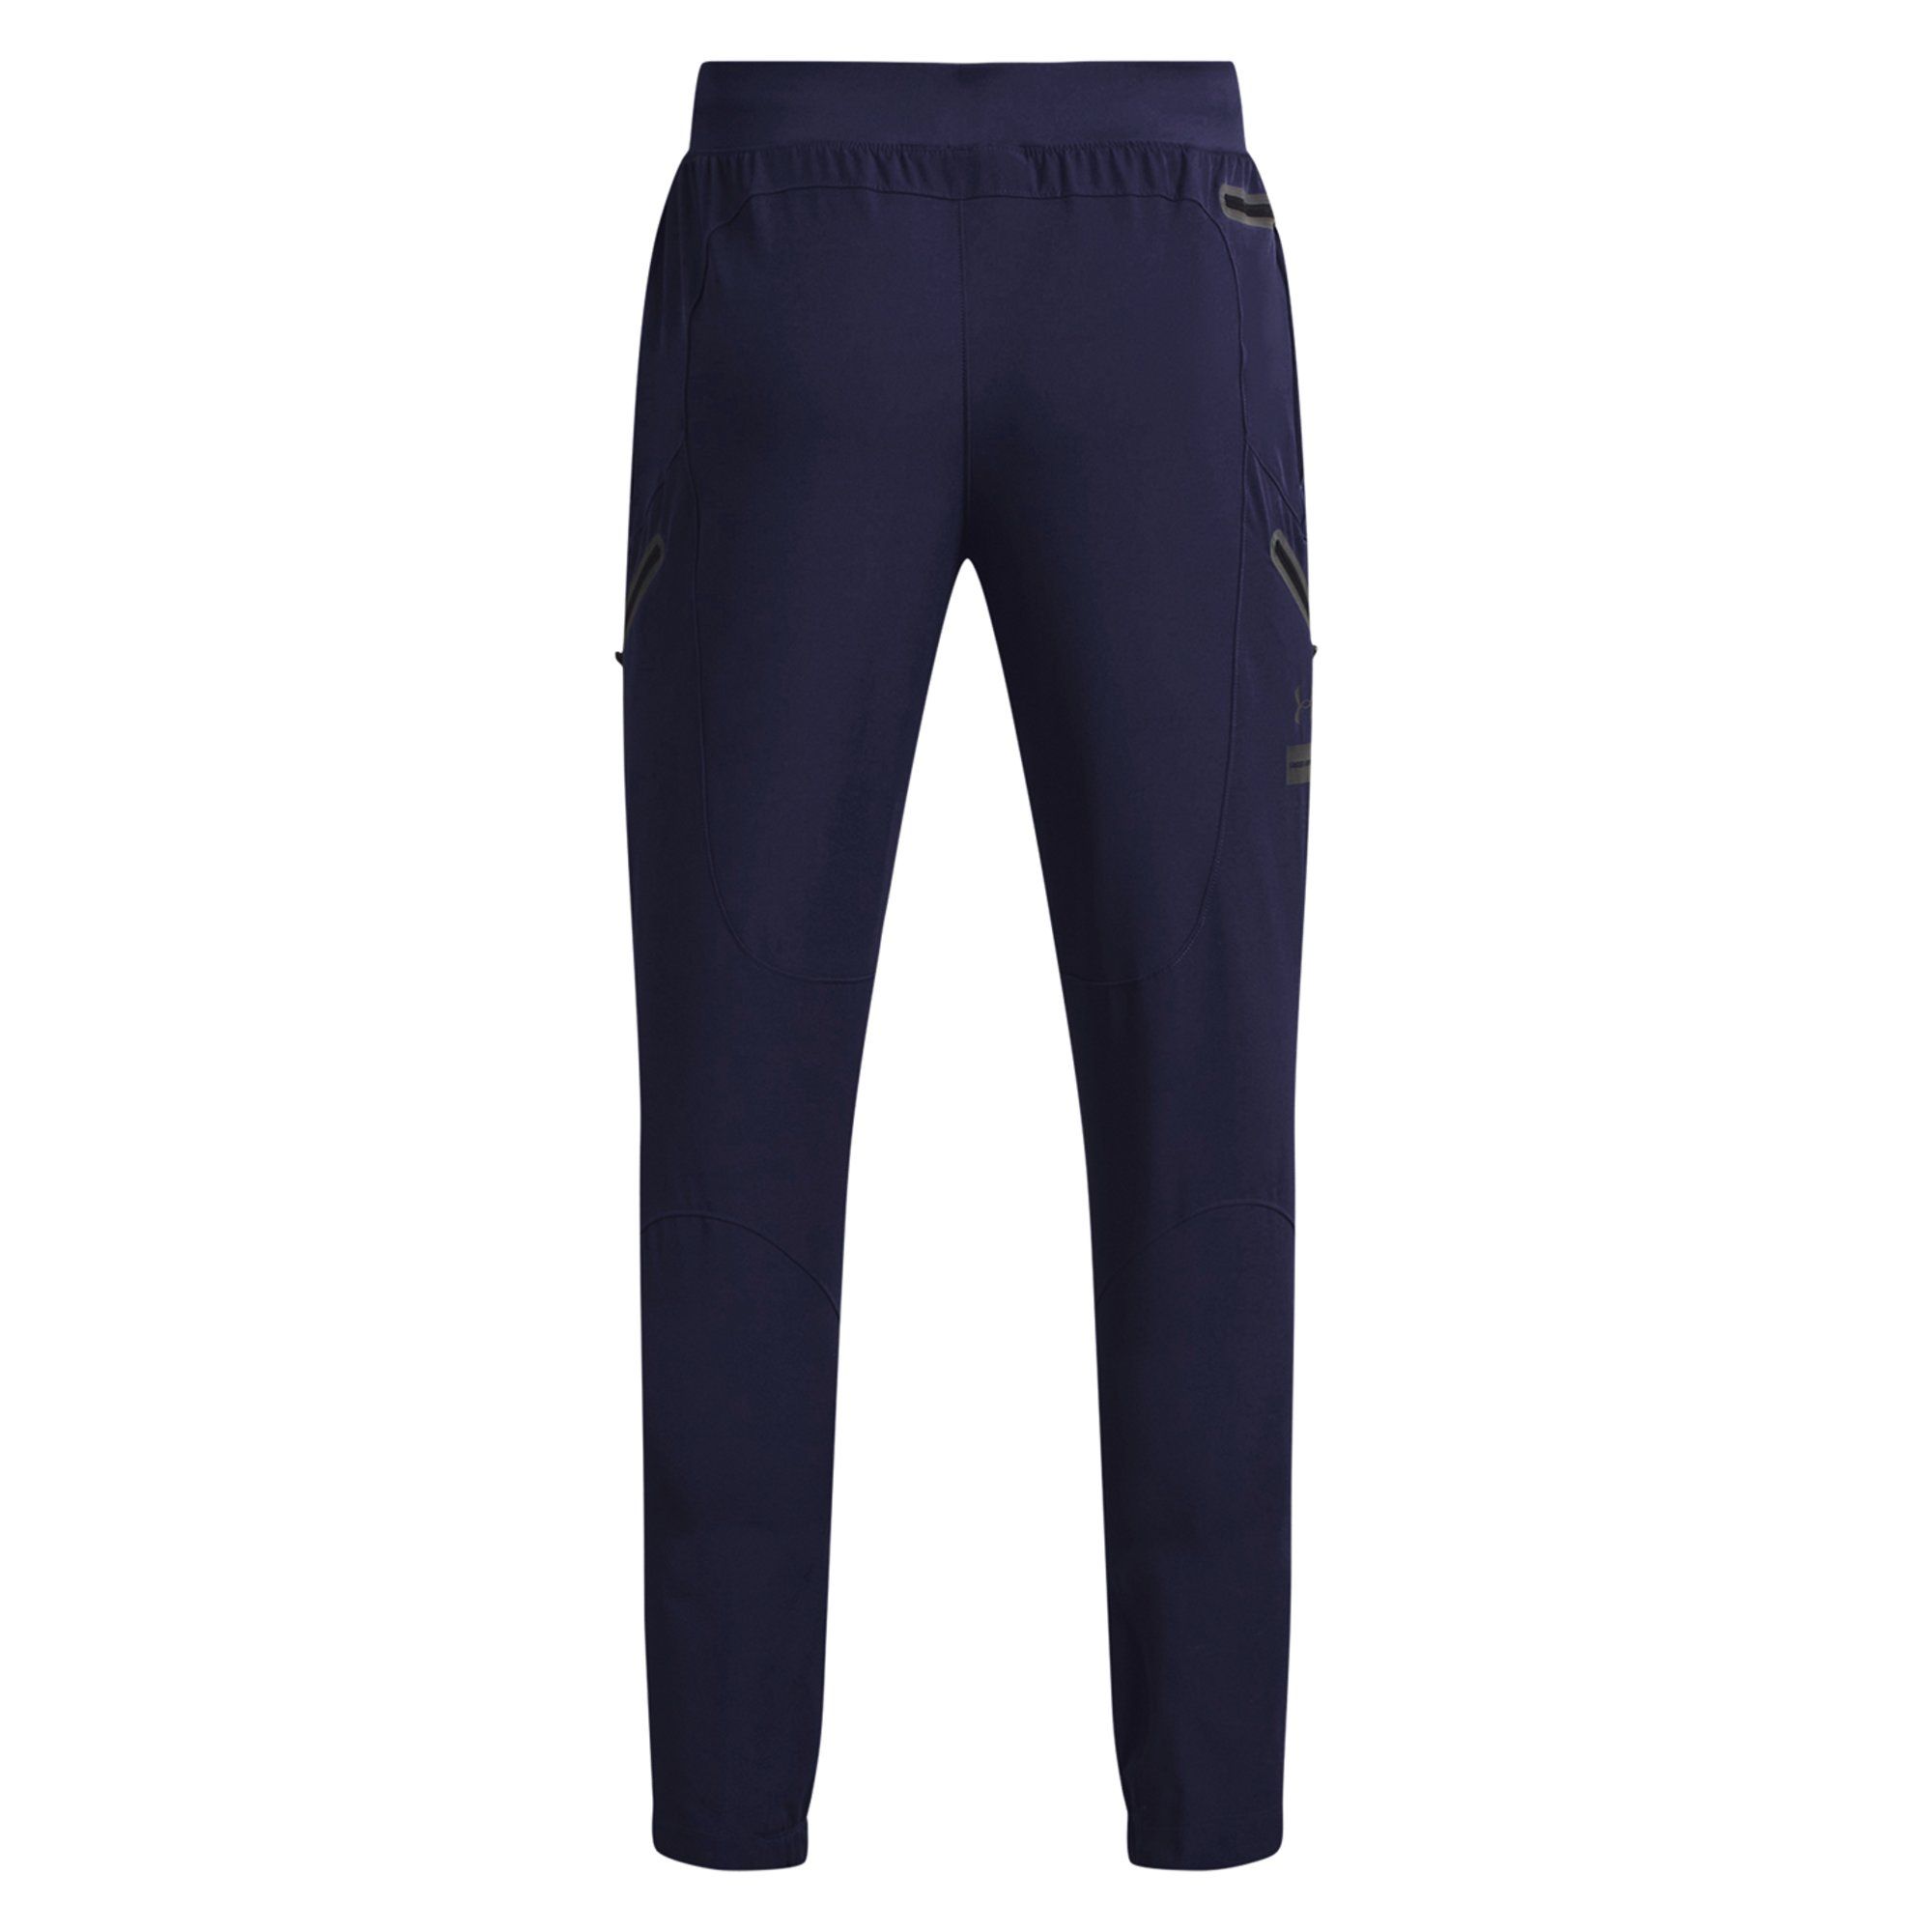  Under Armour Unstoppable Cargo Pants - Navy 